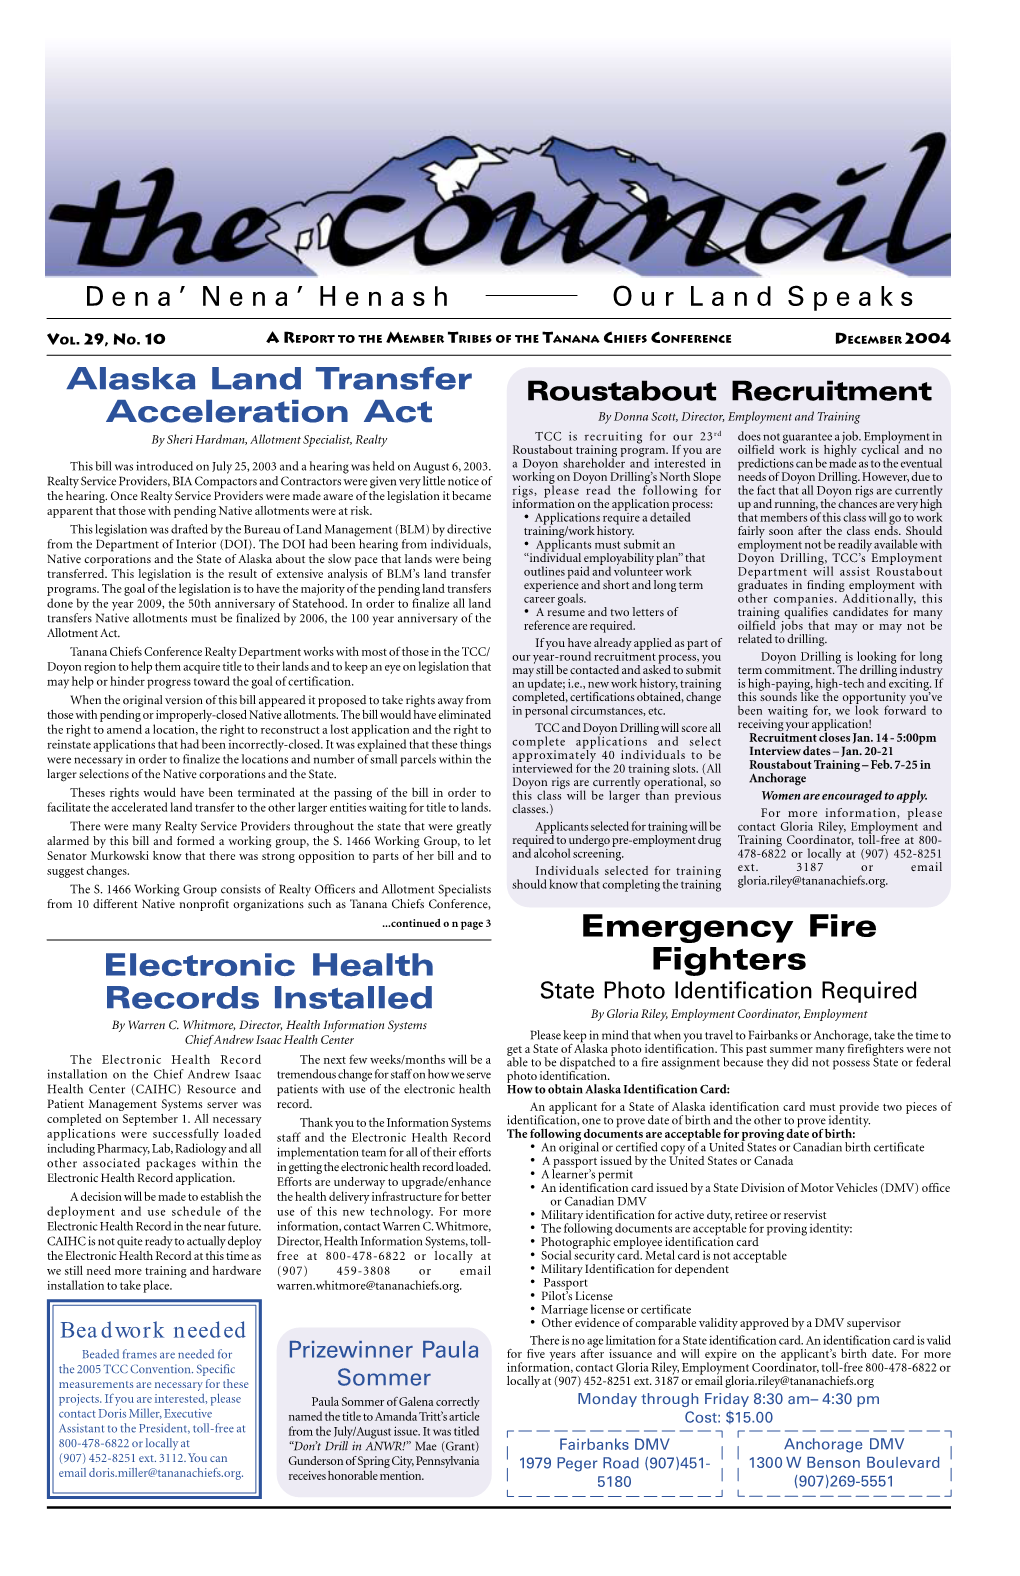 Electronic Health Records Installed Emergency Fire Fighters Alaska